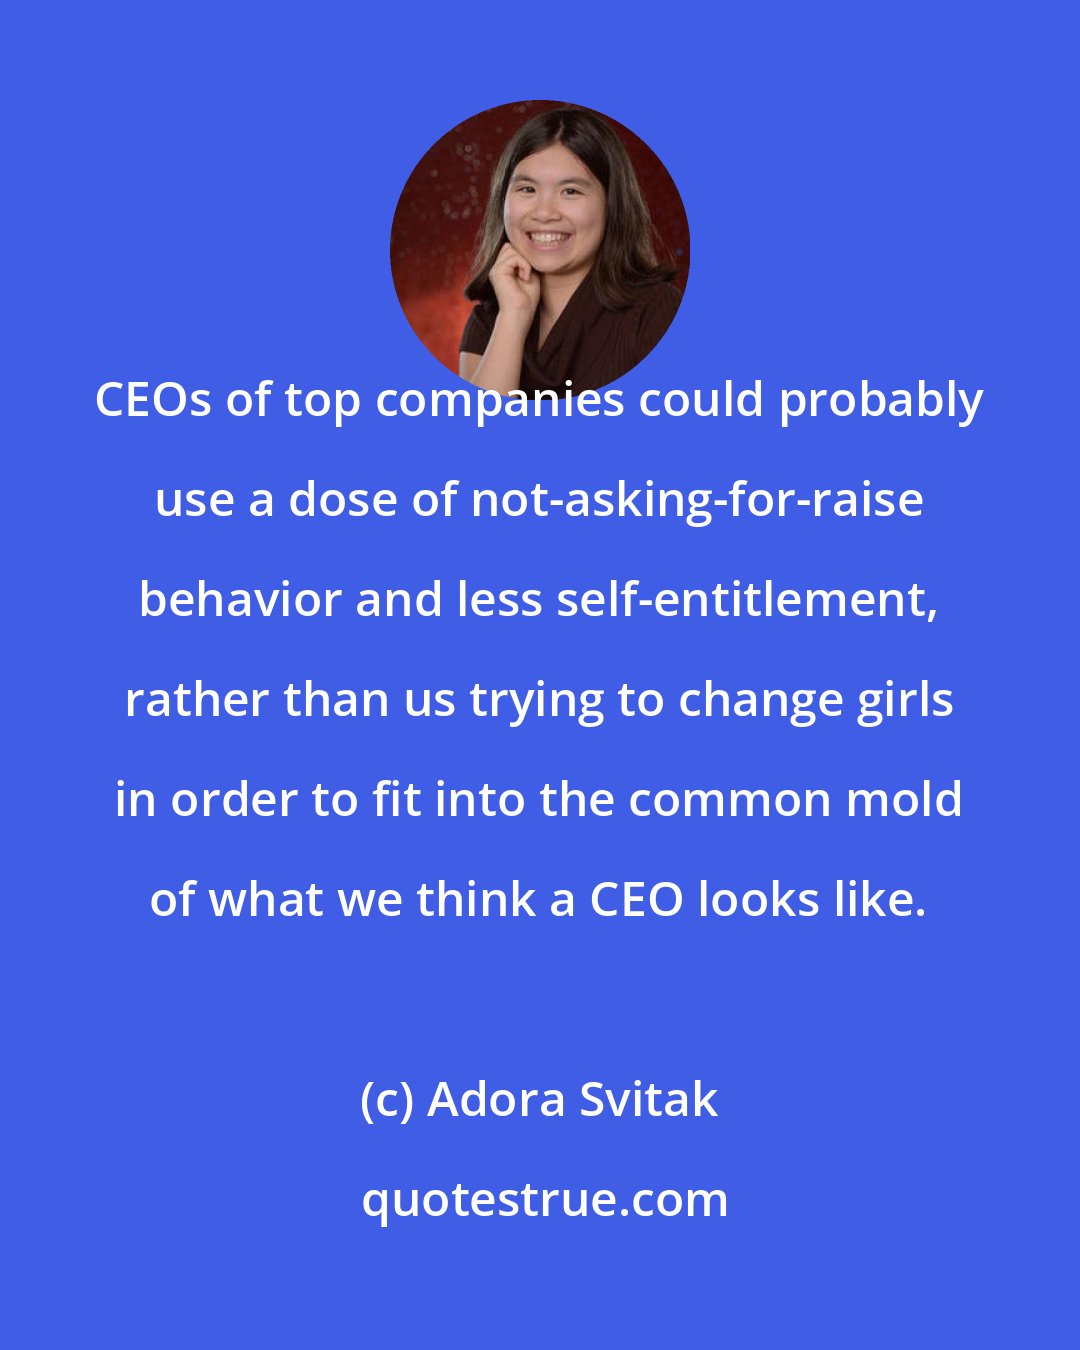 Adora Svitak: CEOs of top companies could probably use a dose of not-asking-for-raise behavior and less self-entitlement, rather than us trying to change girls in order to fit into the common mold of what we think a CEO looks like.